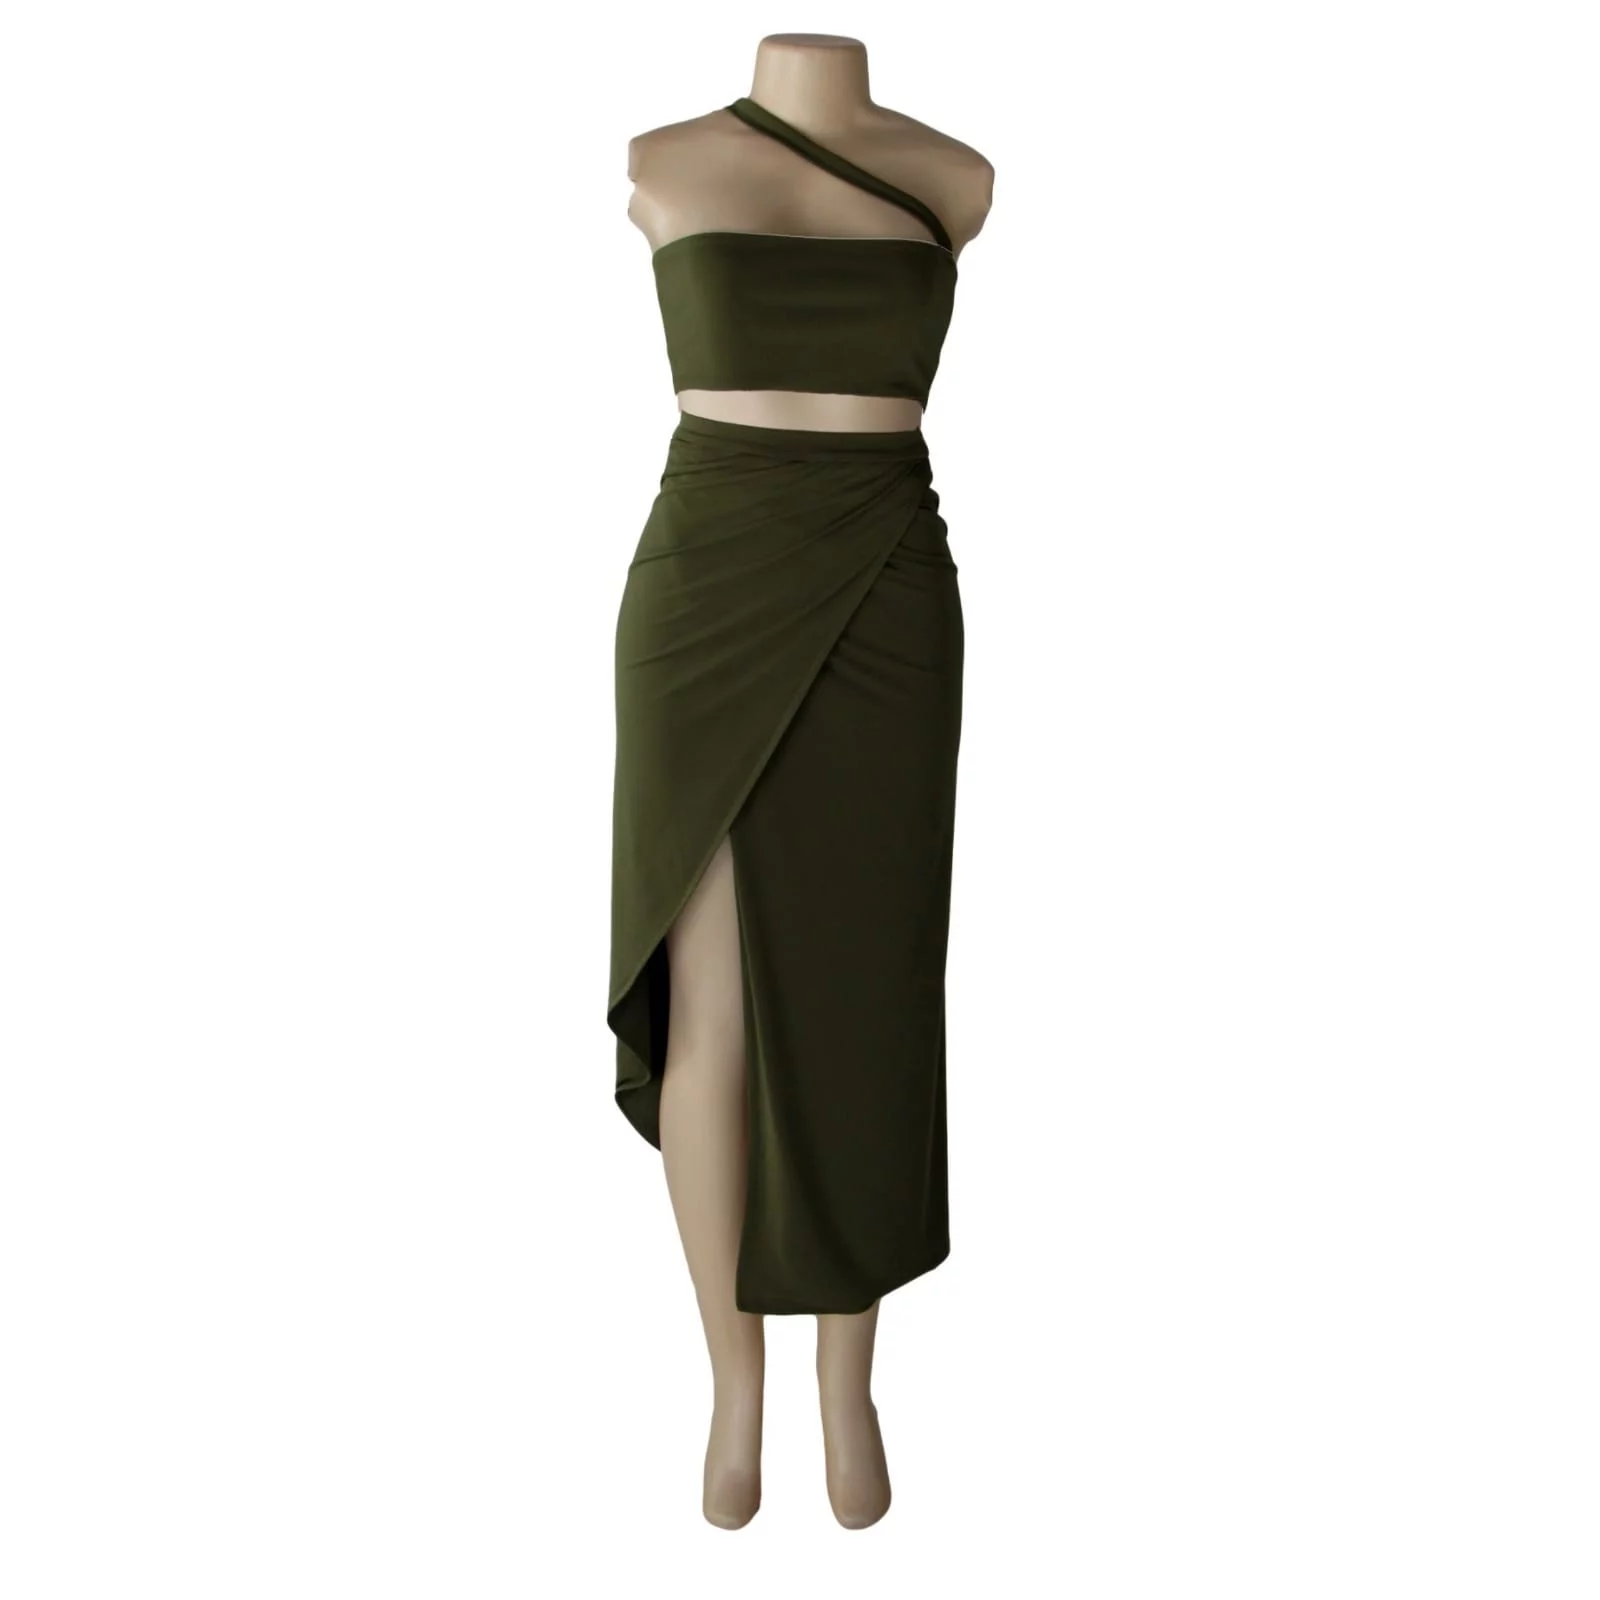 Army green 2 piece smart casual outfit 1 army green 2 piece smart casual outfit with a crop top and a crossed slit fitted skirt